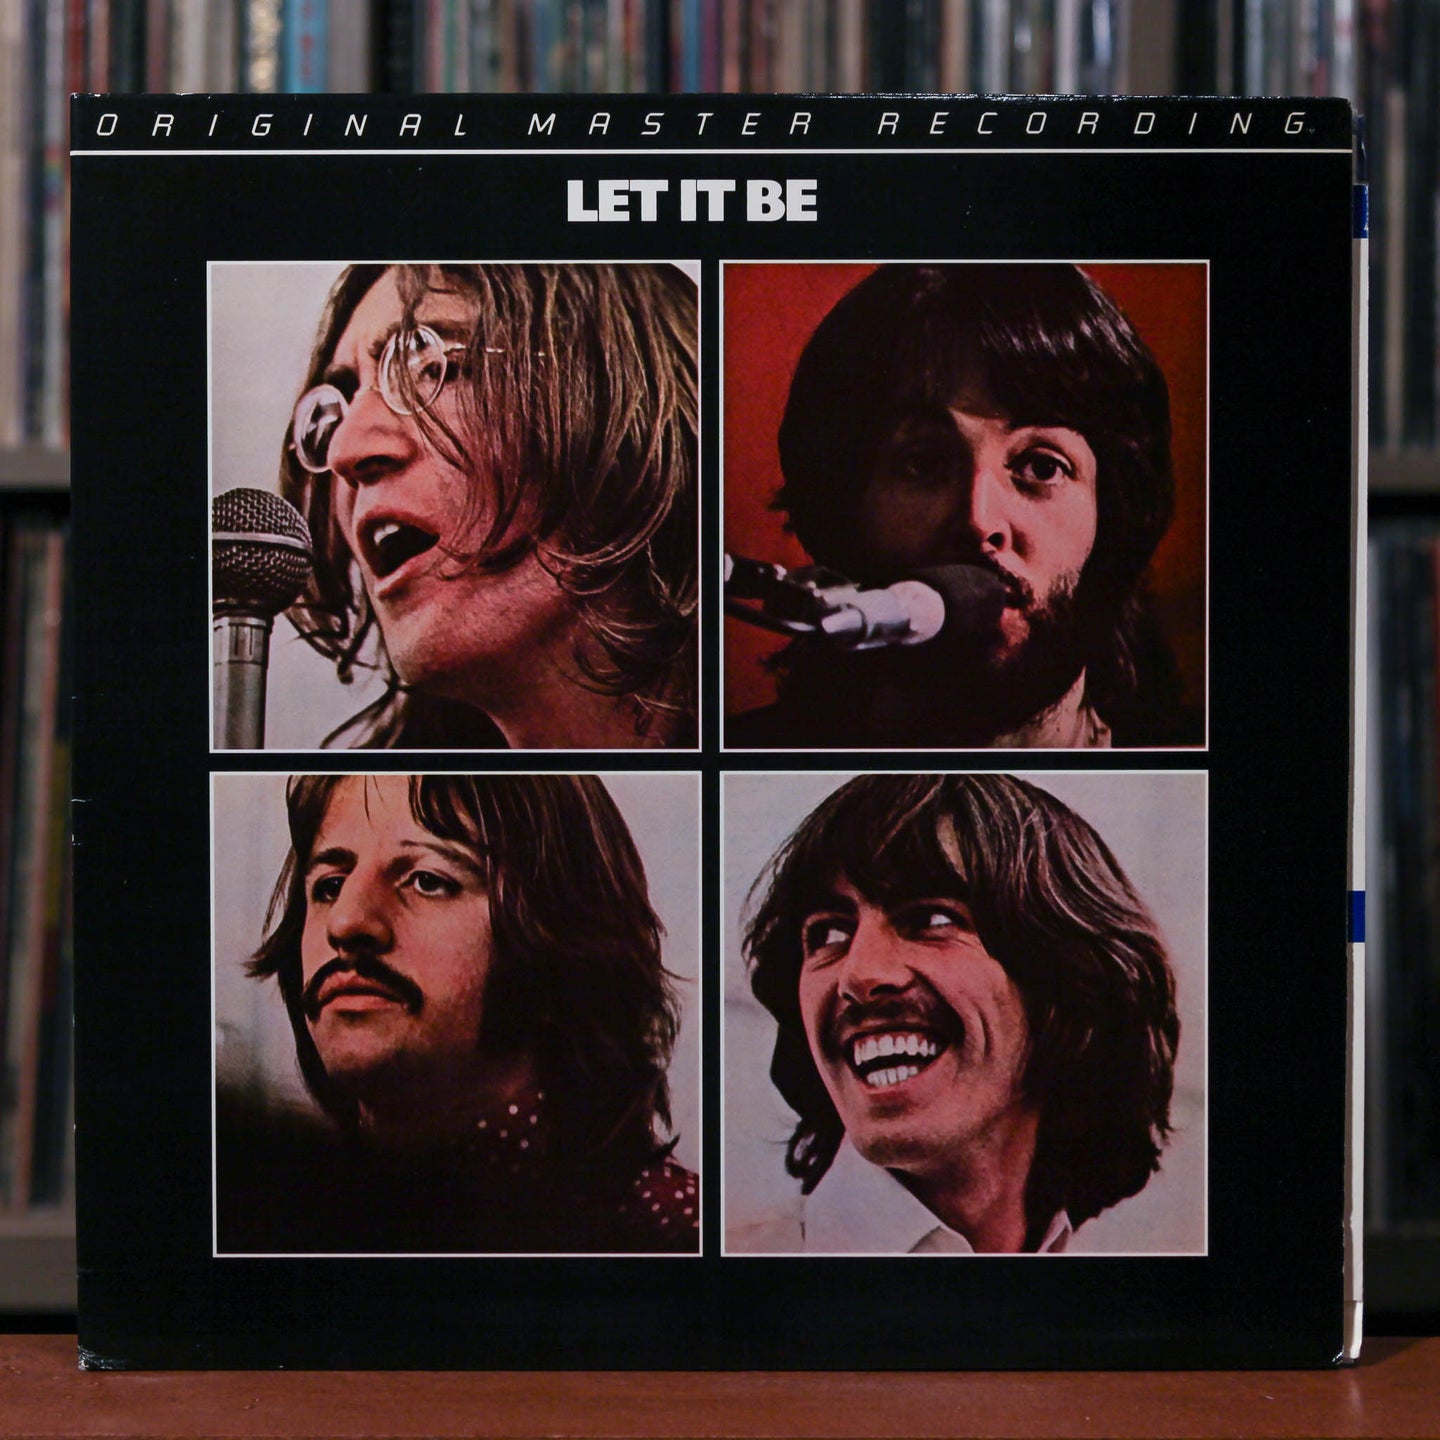 The Beatles - Let It Be - MFSL 1-109 - 1986 Mobile Fidelity Sound Lab,